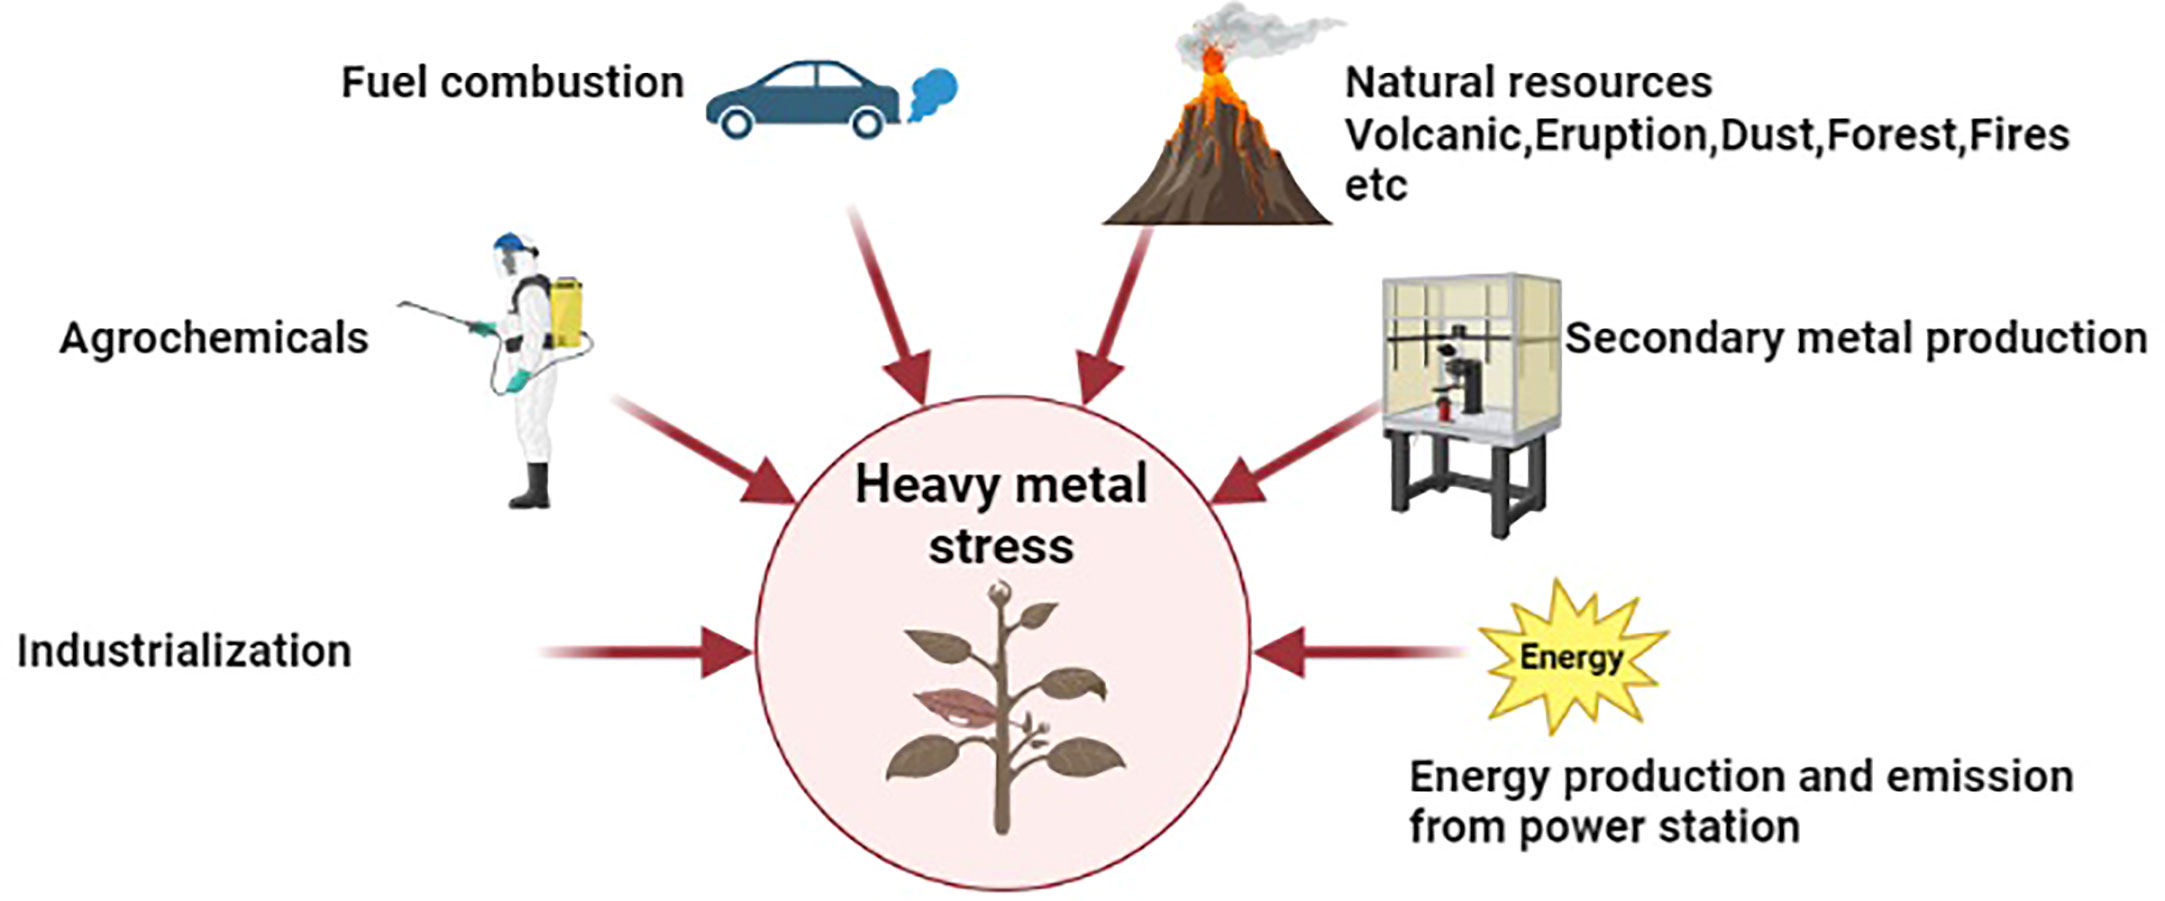 Dust and heavy metals reduction measures